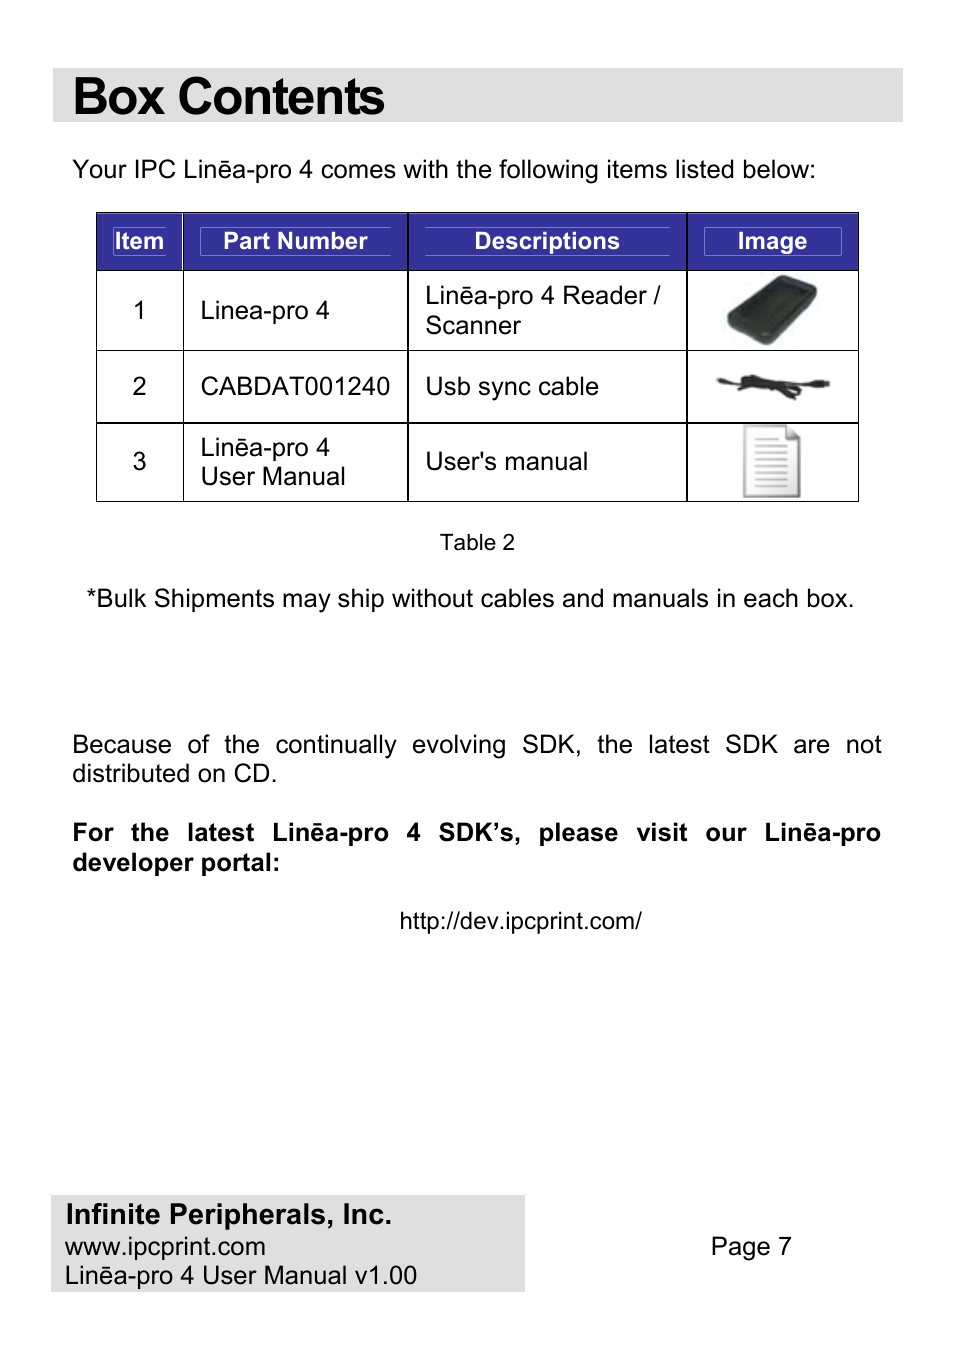 Box contents | Infinite Peripherals PRO 4 User Manual | Page 7 / 24